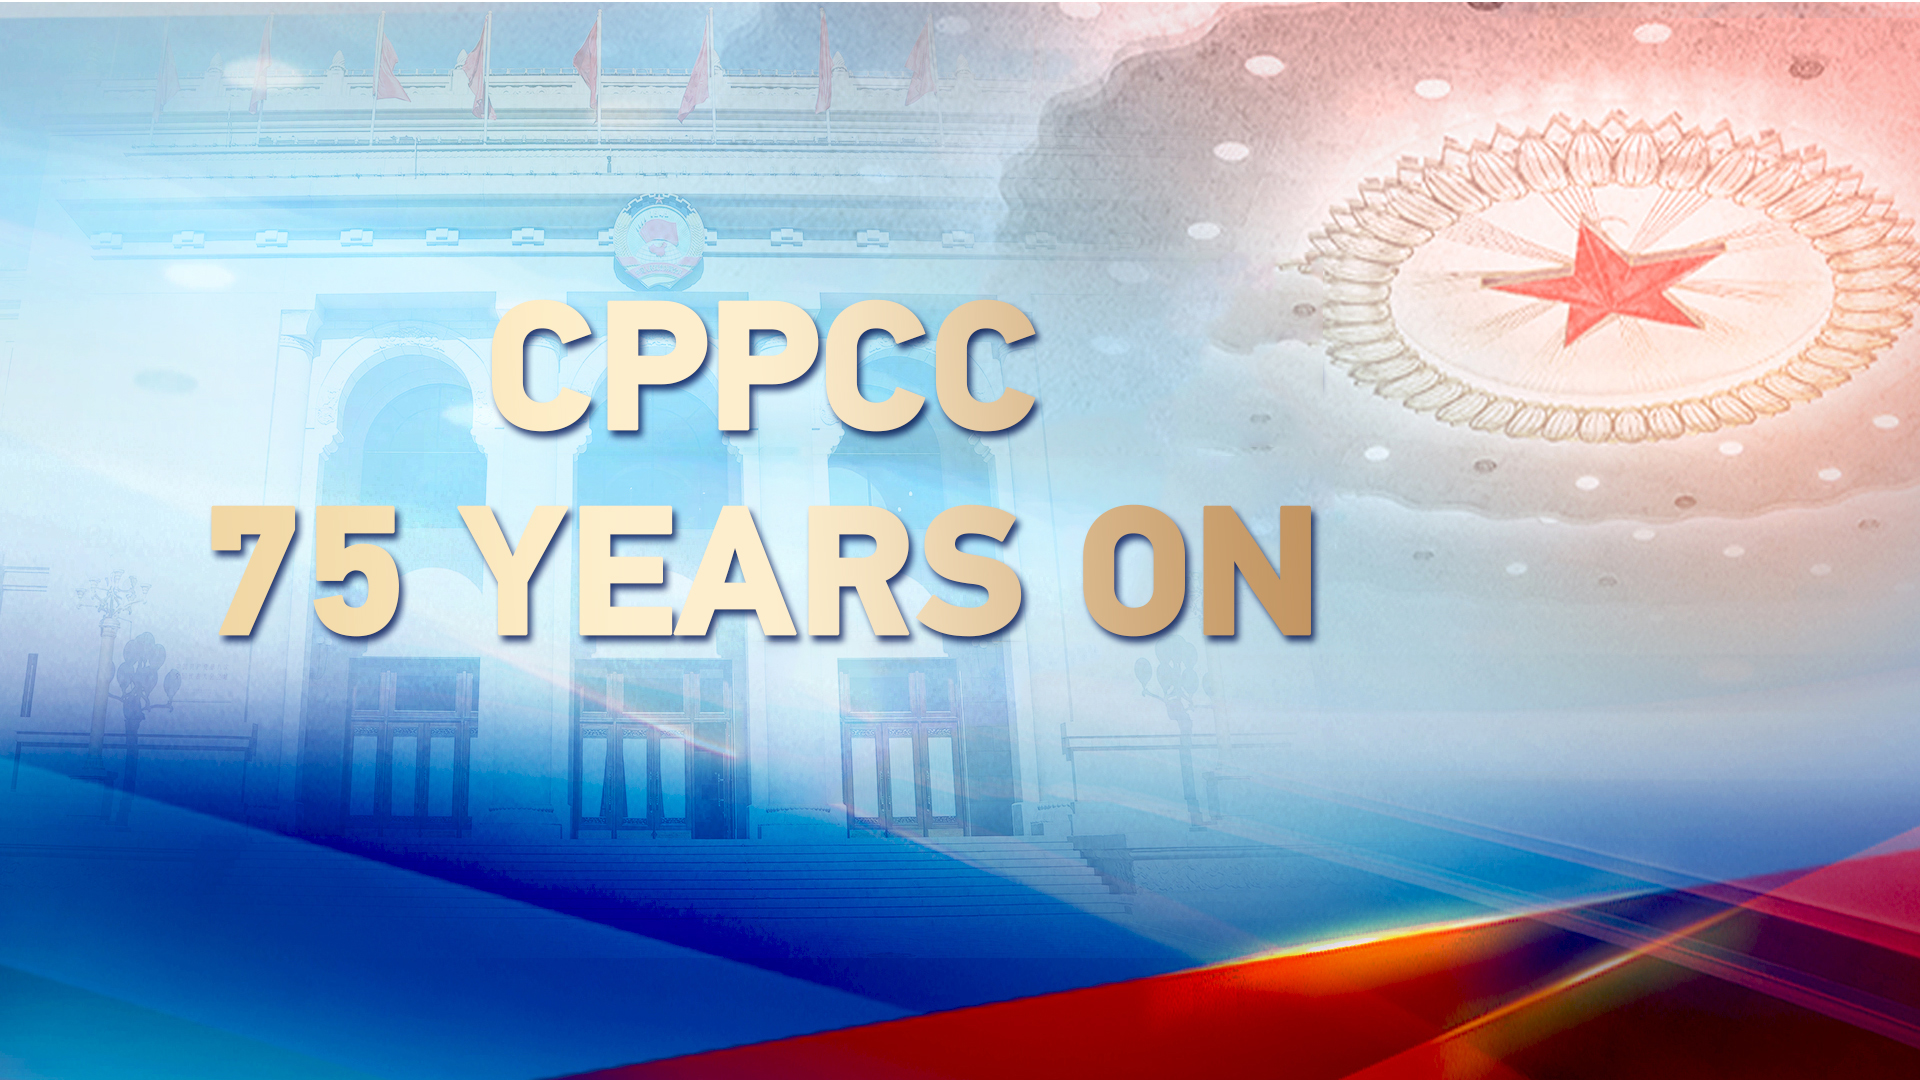 Live: CPPCC – 75 Years On